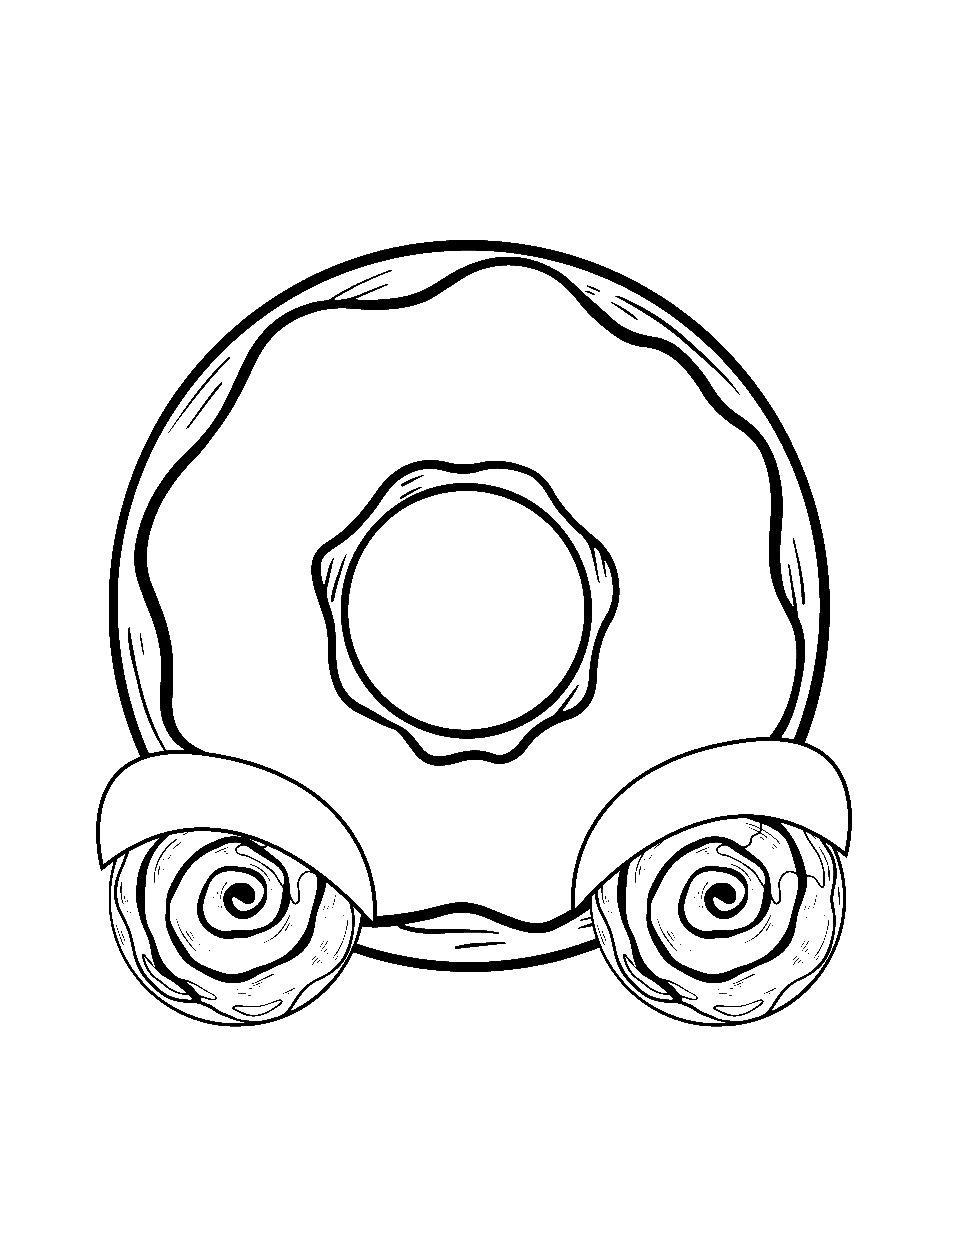 Donut Car Coloring Page - A donut car with wheels made of donuts.